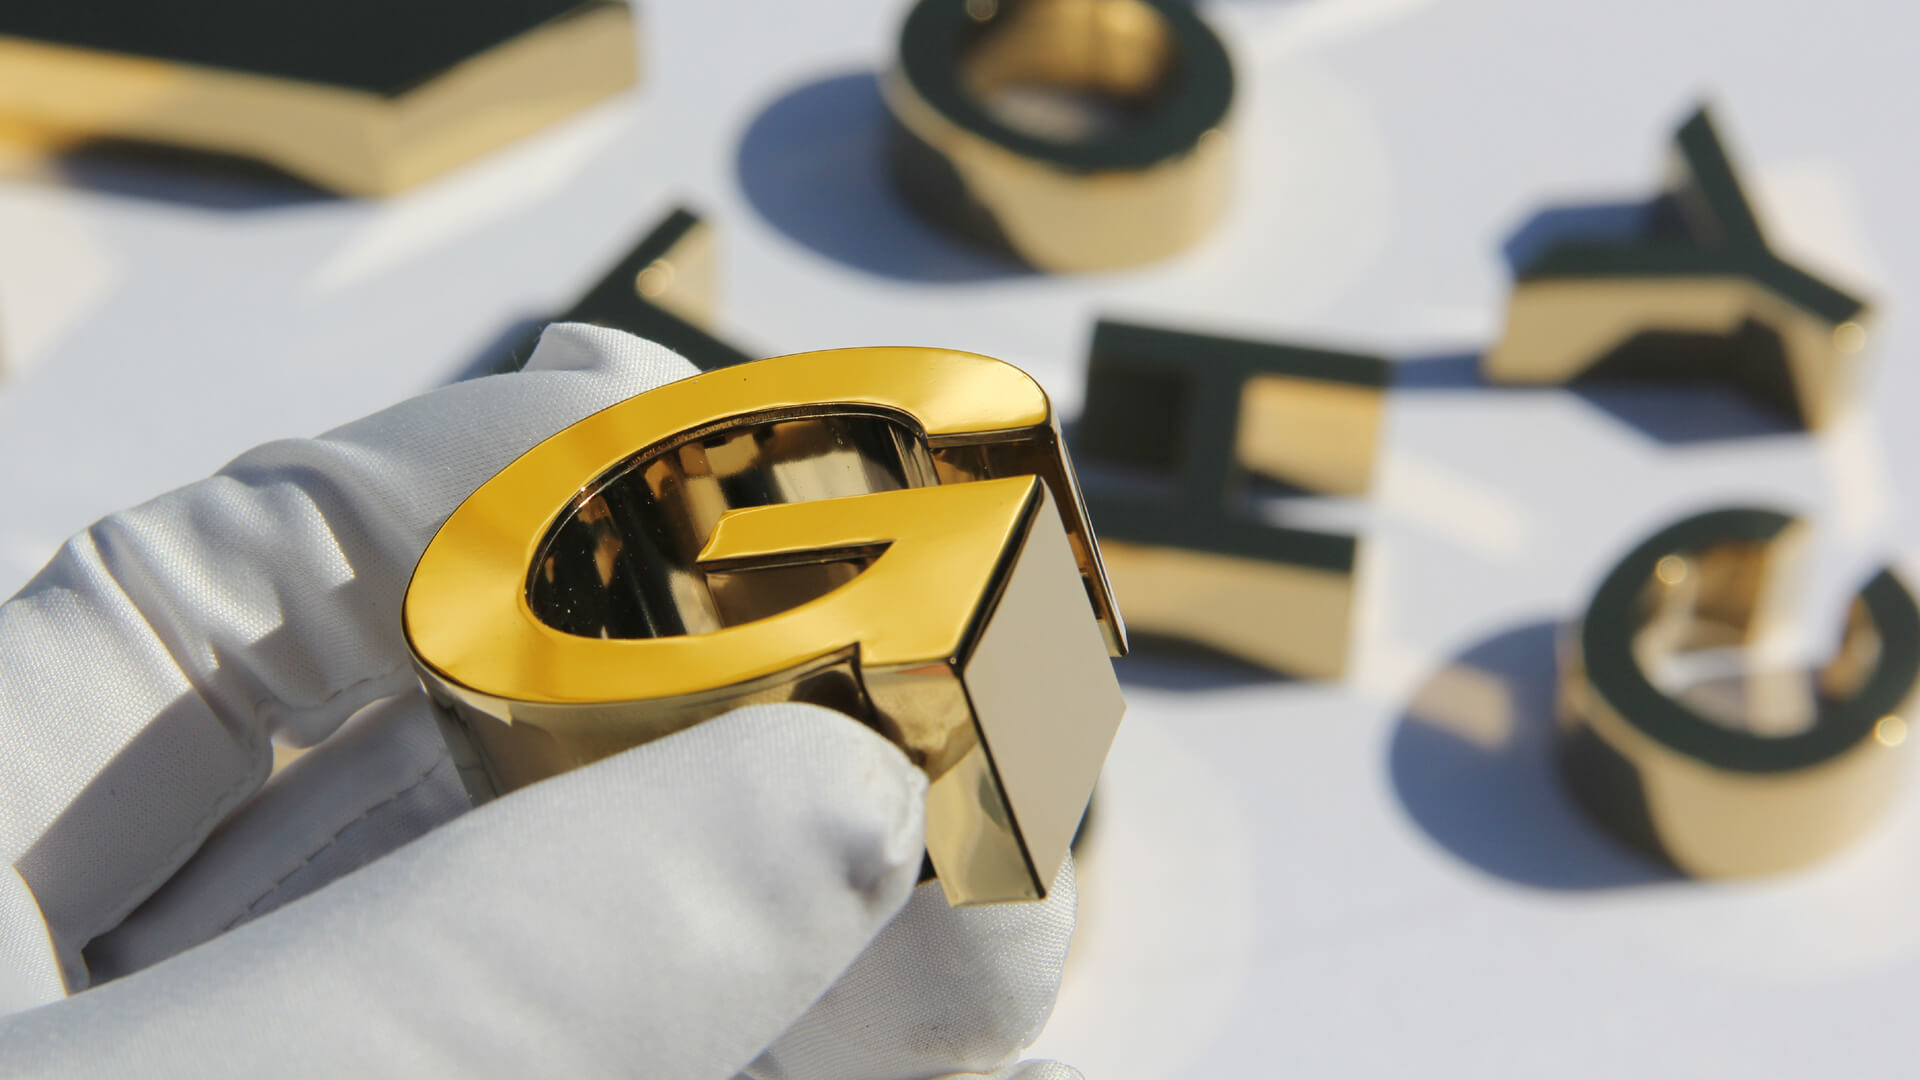 Letter G - made of stainless steel, polished in gold color